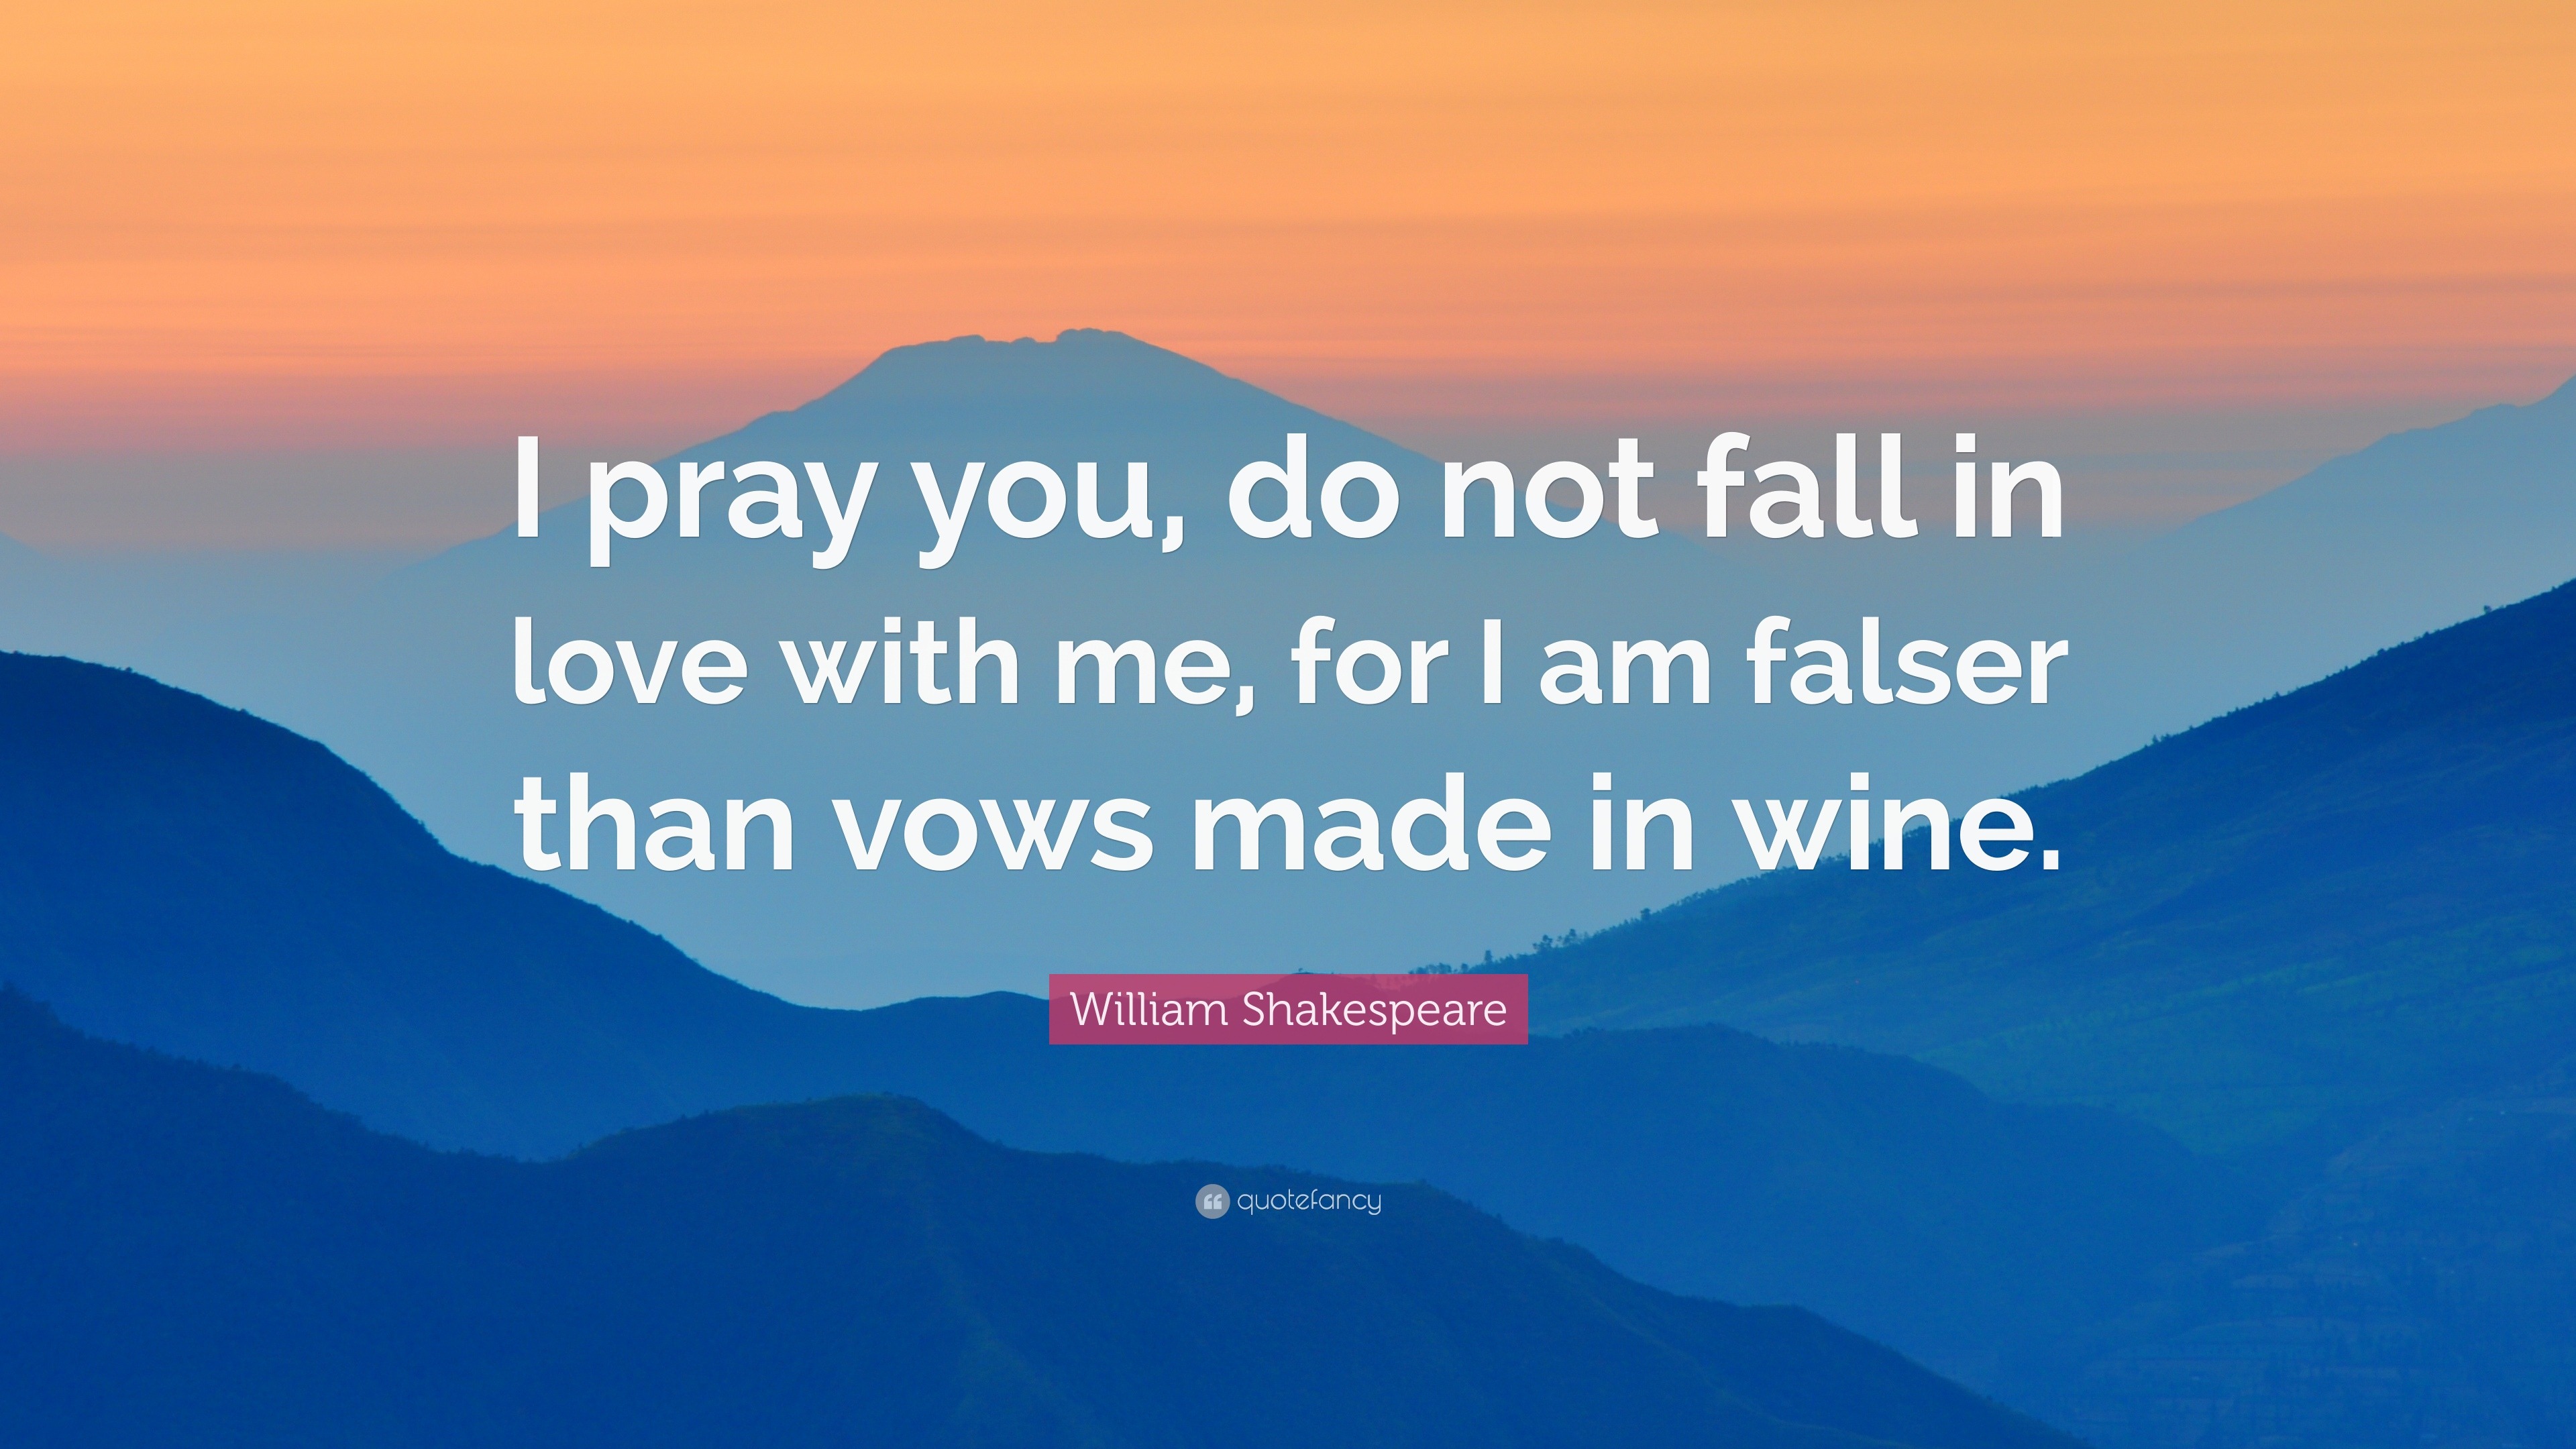 William Shakespeare Quote “I pray you do not fall in love with me